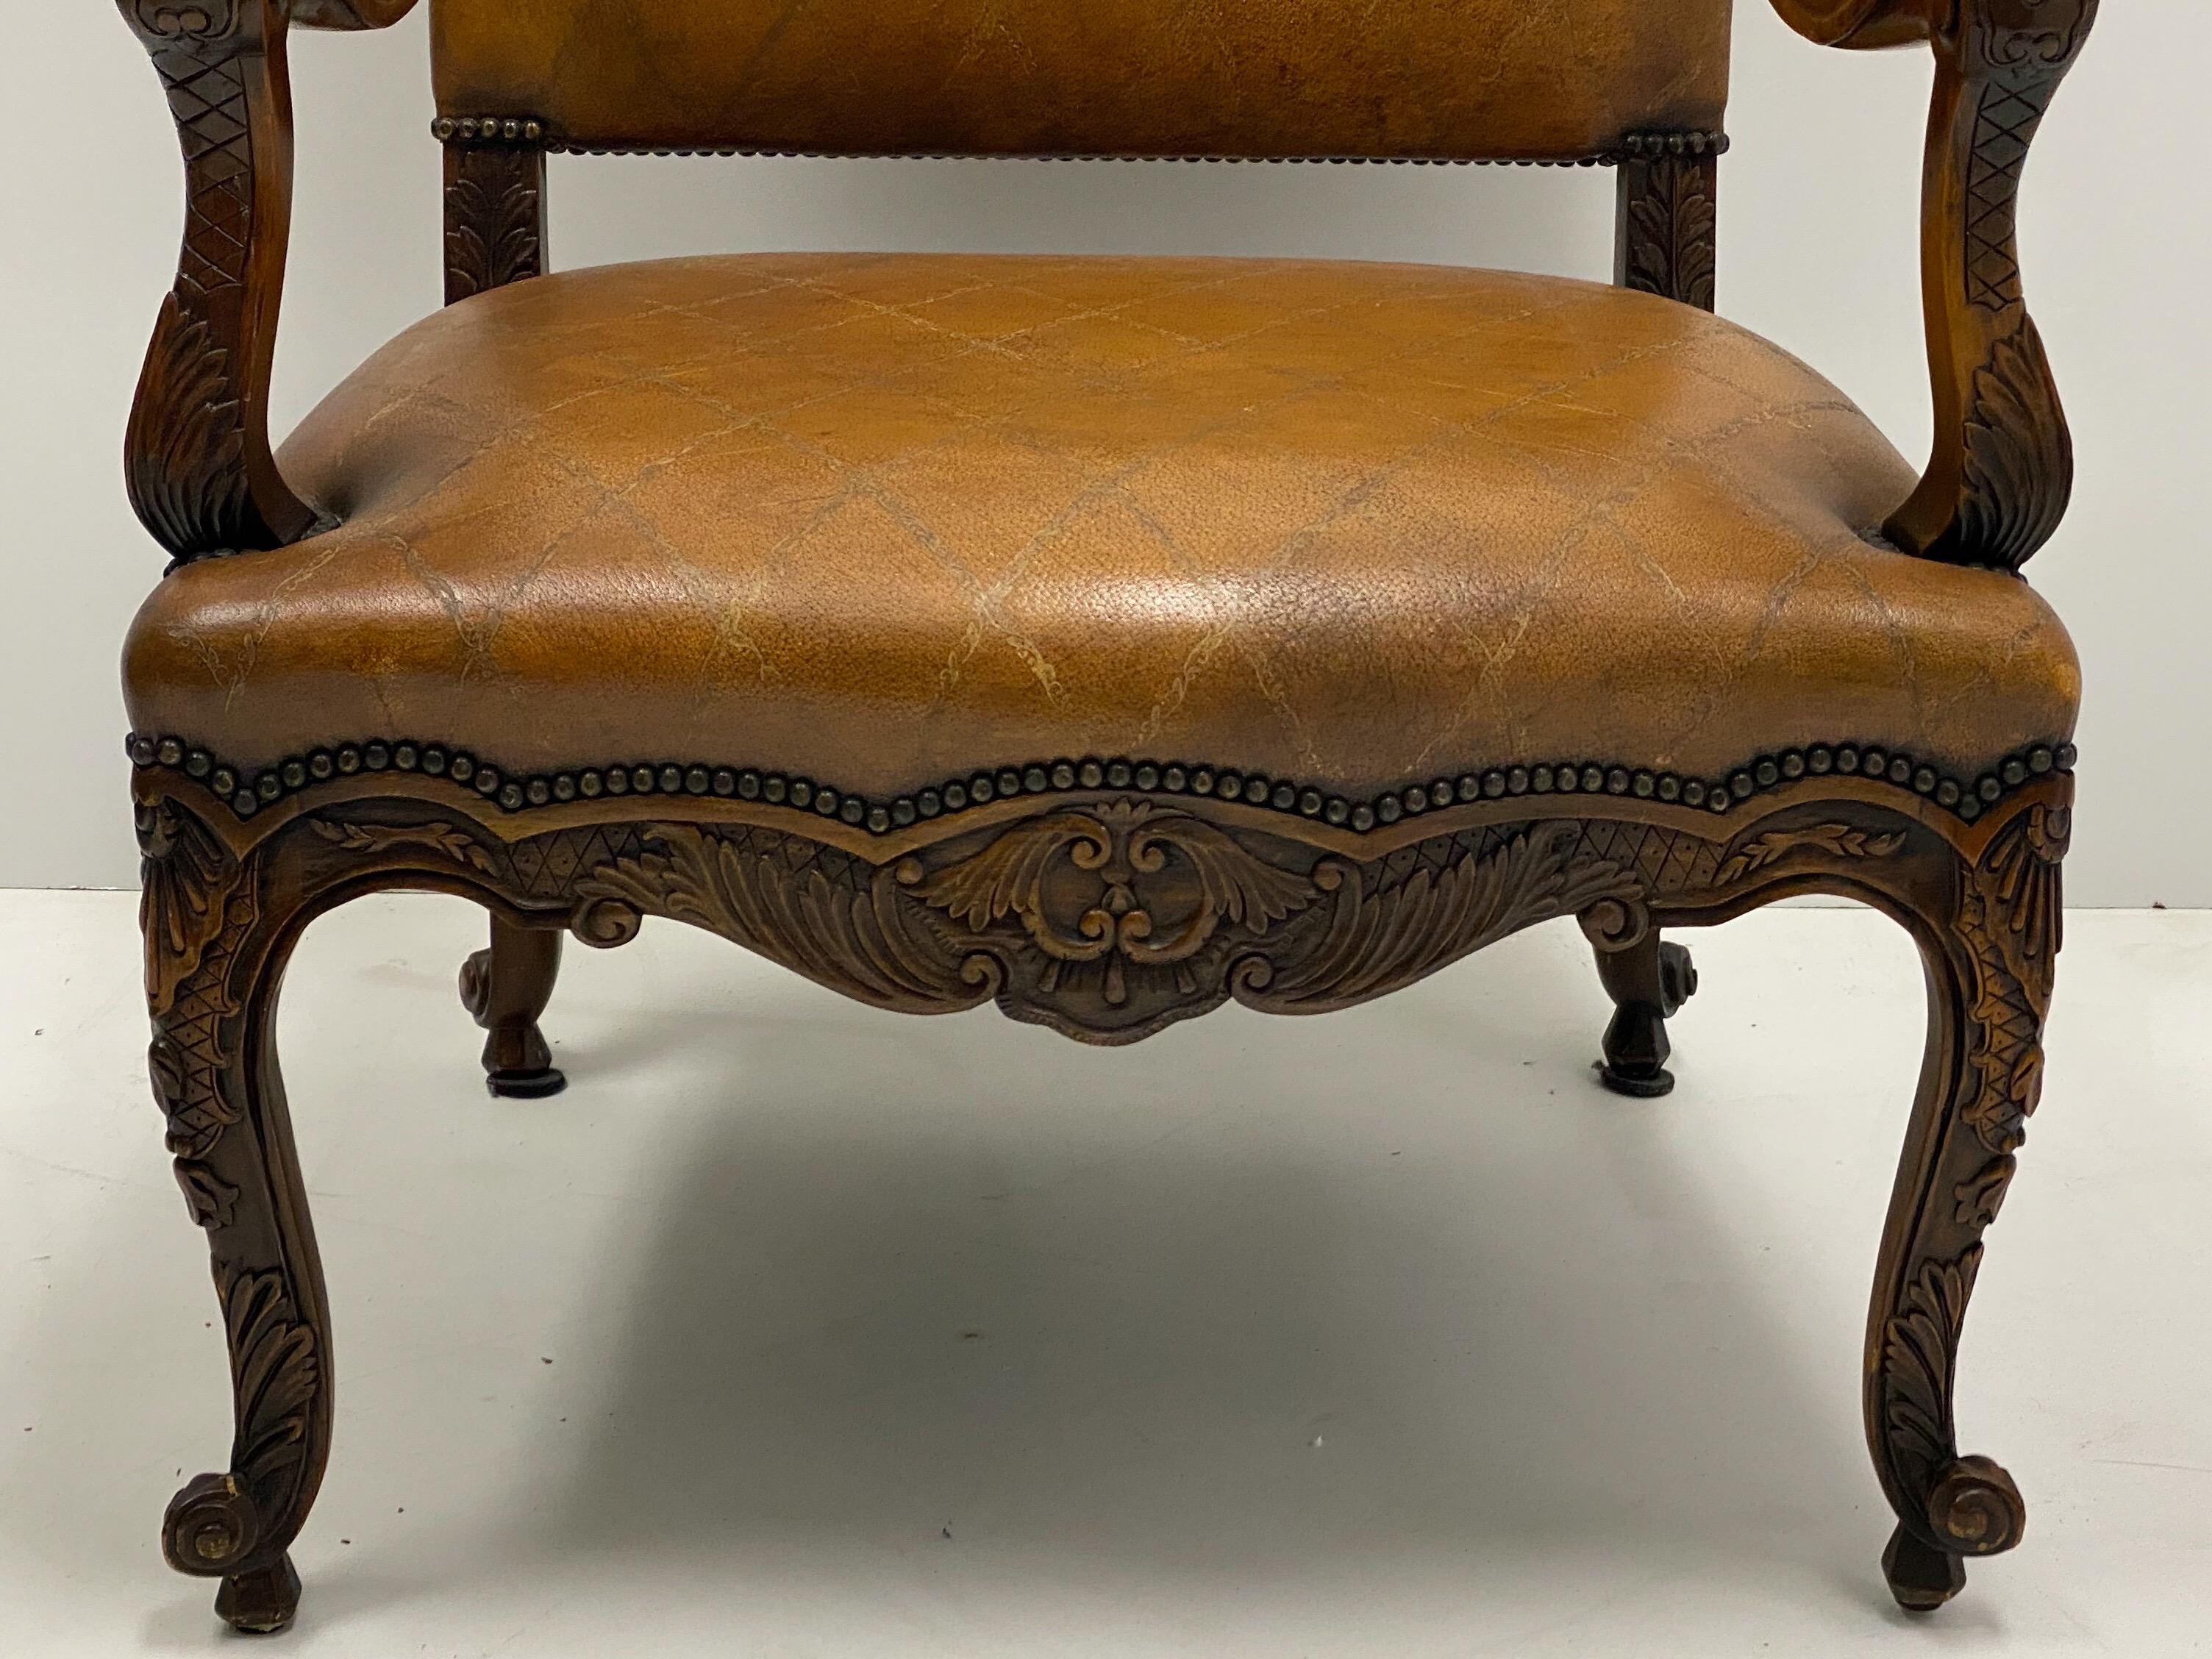 20th Century Large Scale French Louis XV Style Carved Fruitwood Tooled Leather Bergere Chair For Sale